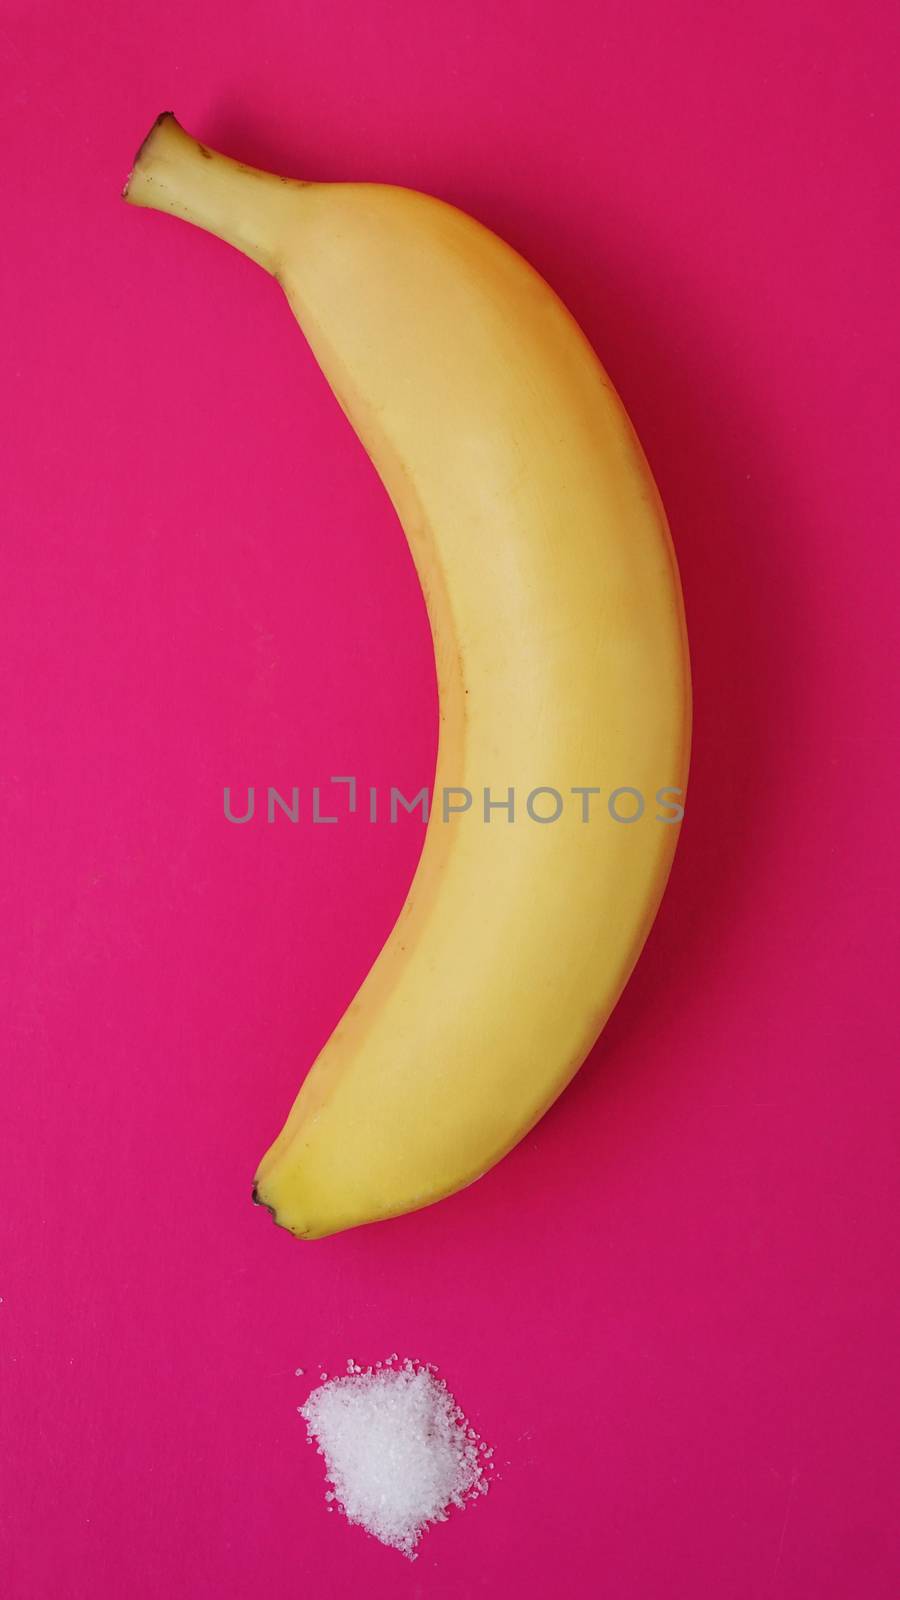 Banana and sugar on a pink background. Diet and healthy eating concept.